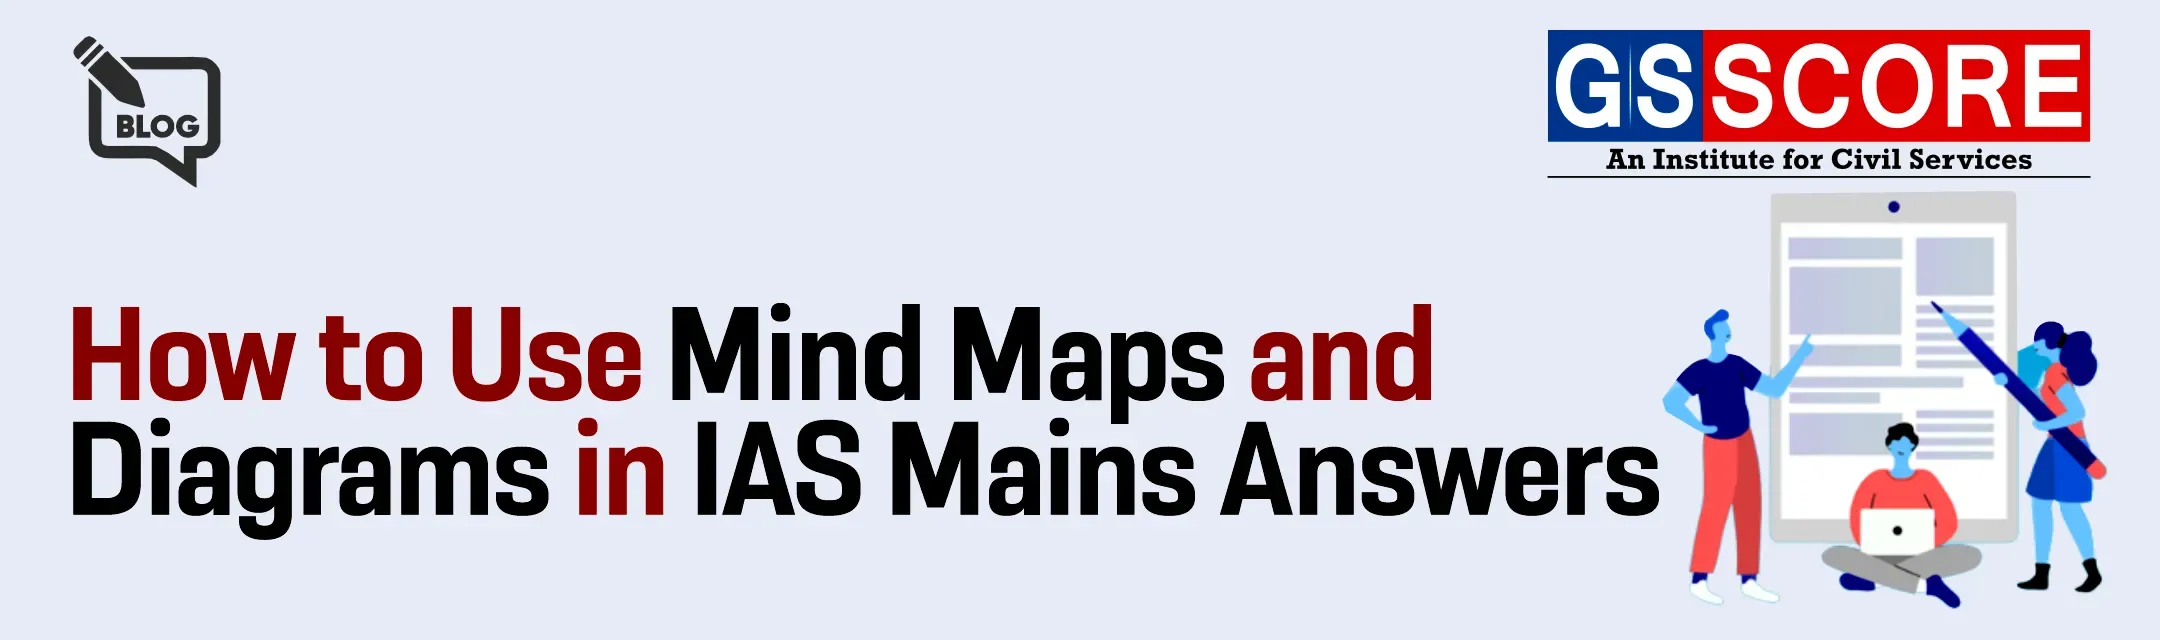 How to Use Mind Maps and Diagrams in IAS Mains Answers?